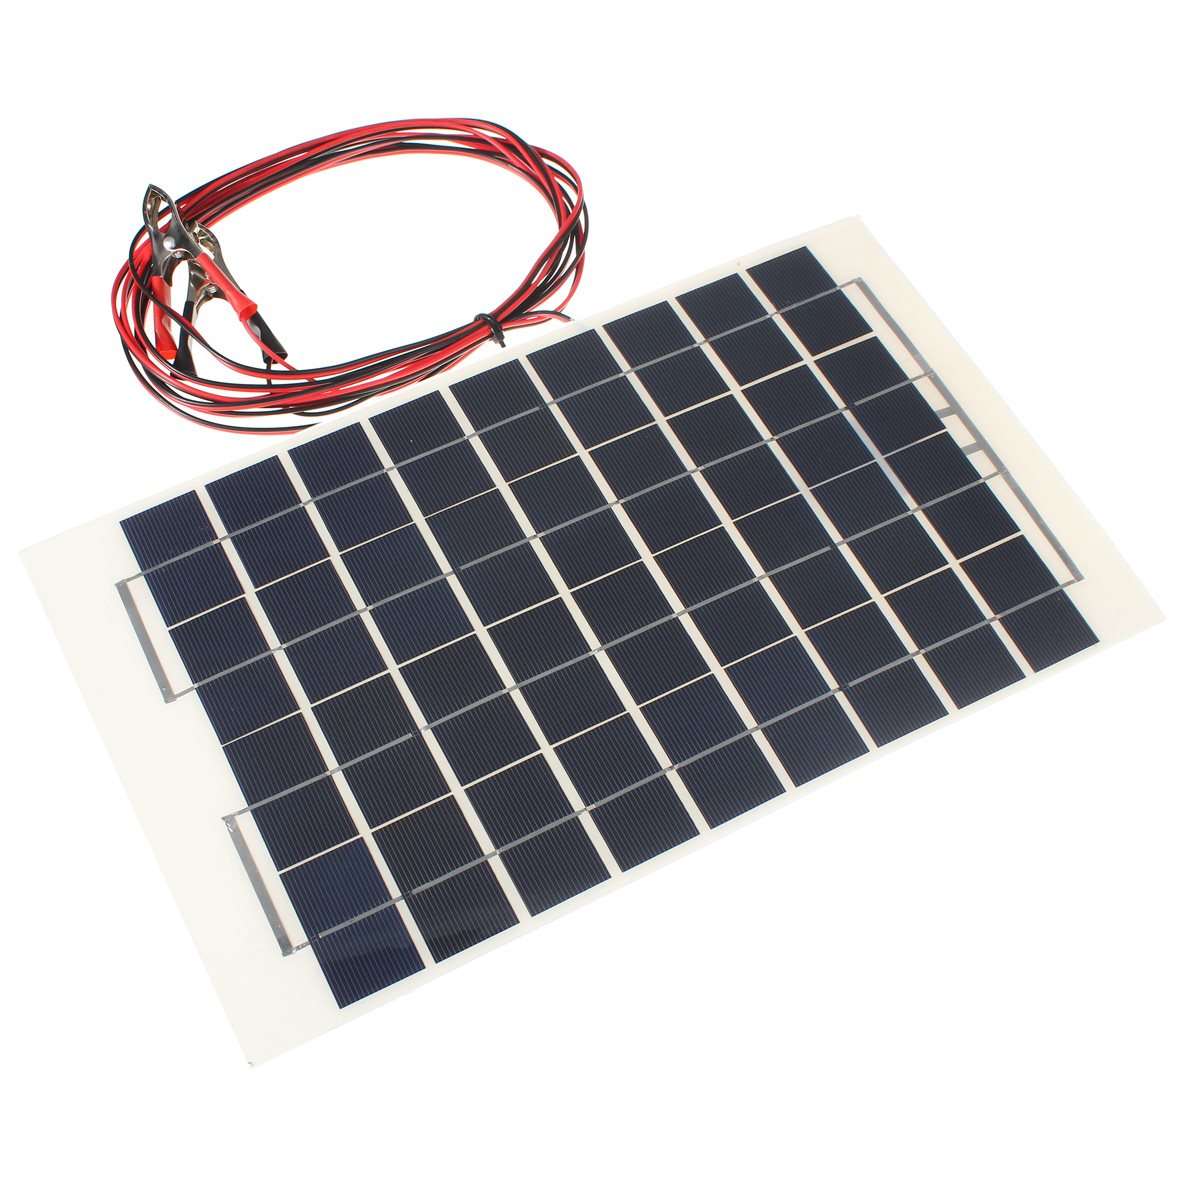 12V 10W PolyCrystalline Transparent Epoxy Resin Cells Solar Panel DIY Solar Module with block diode+2 Alligator Clips+4m Cable